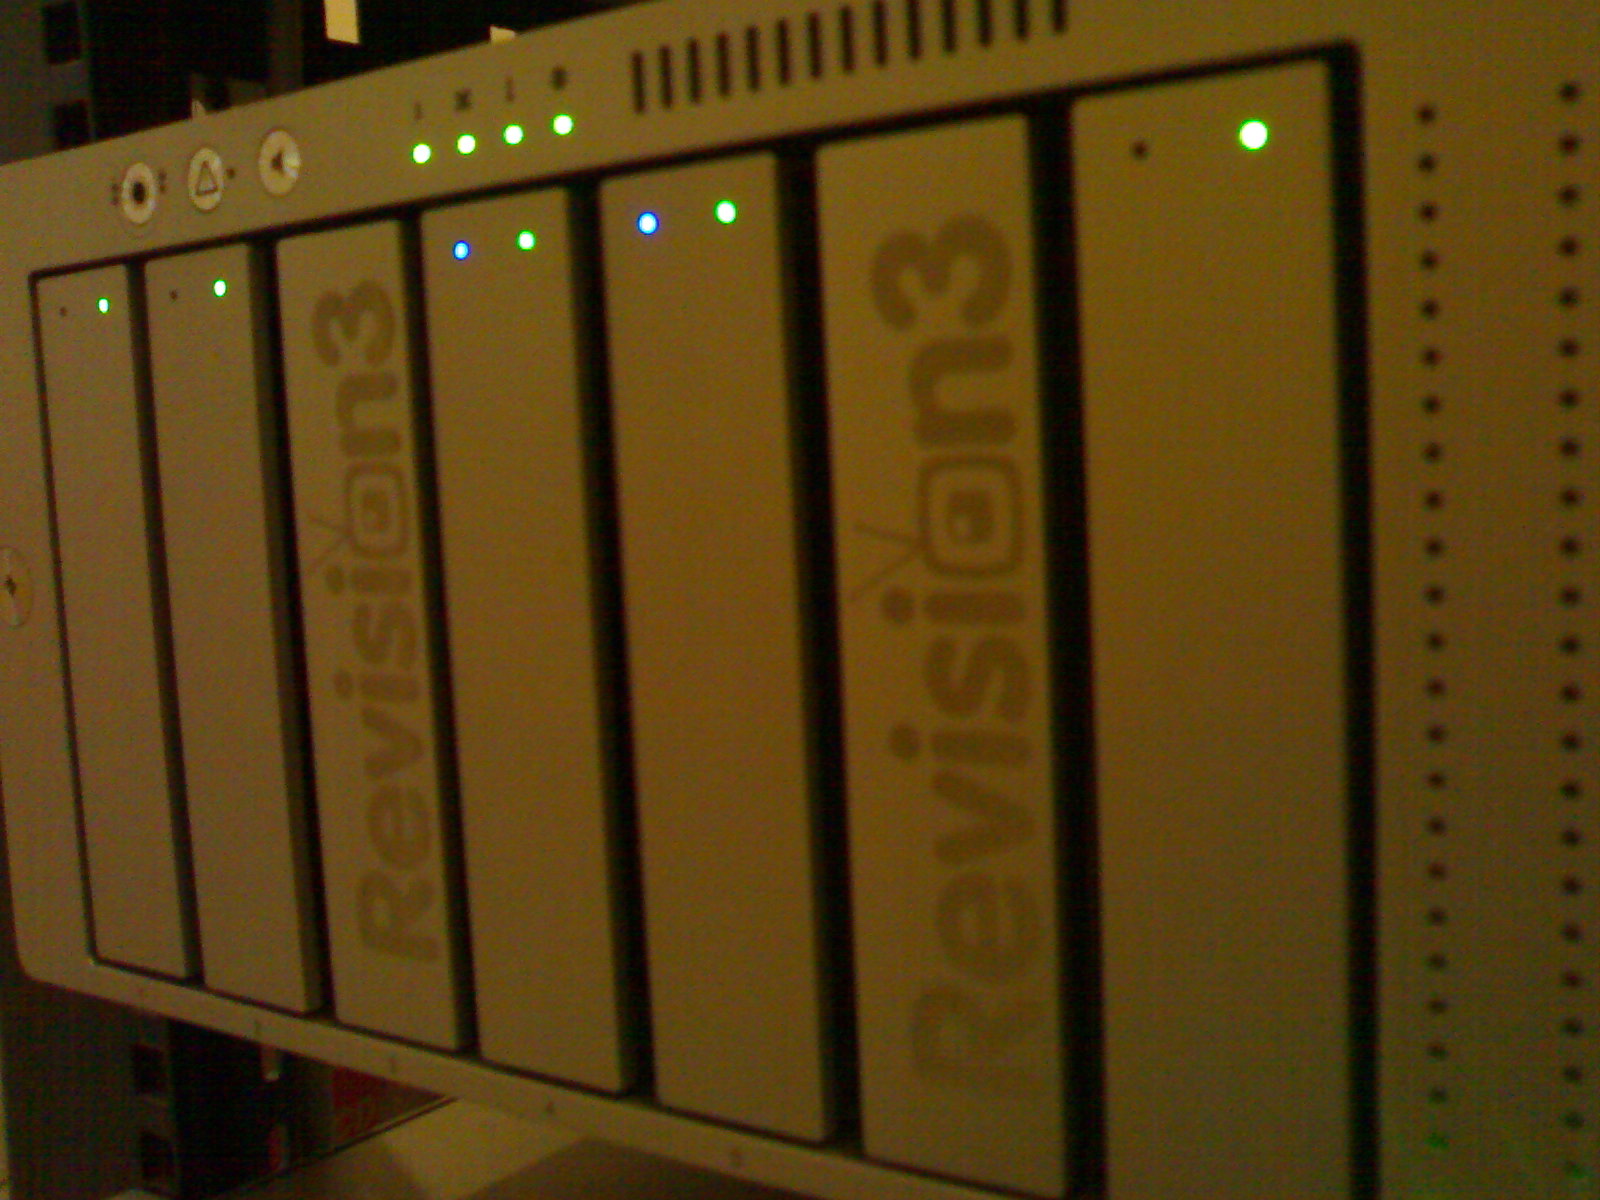 a display with several white servers in a room